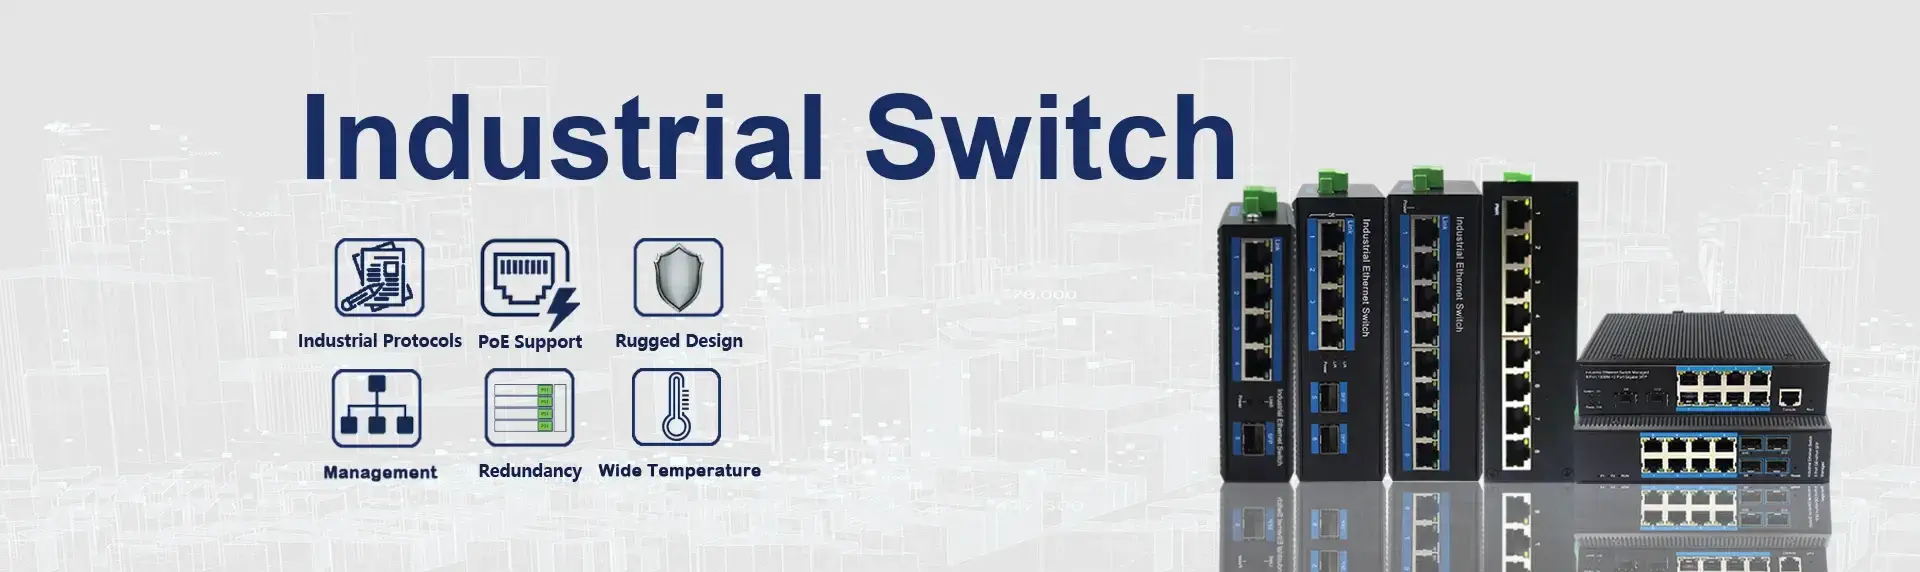 industrial Switch